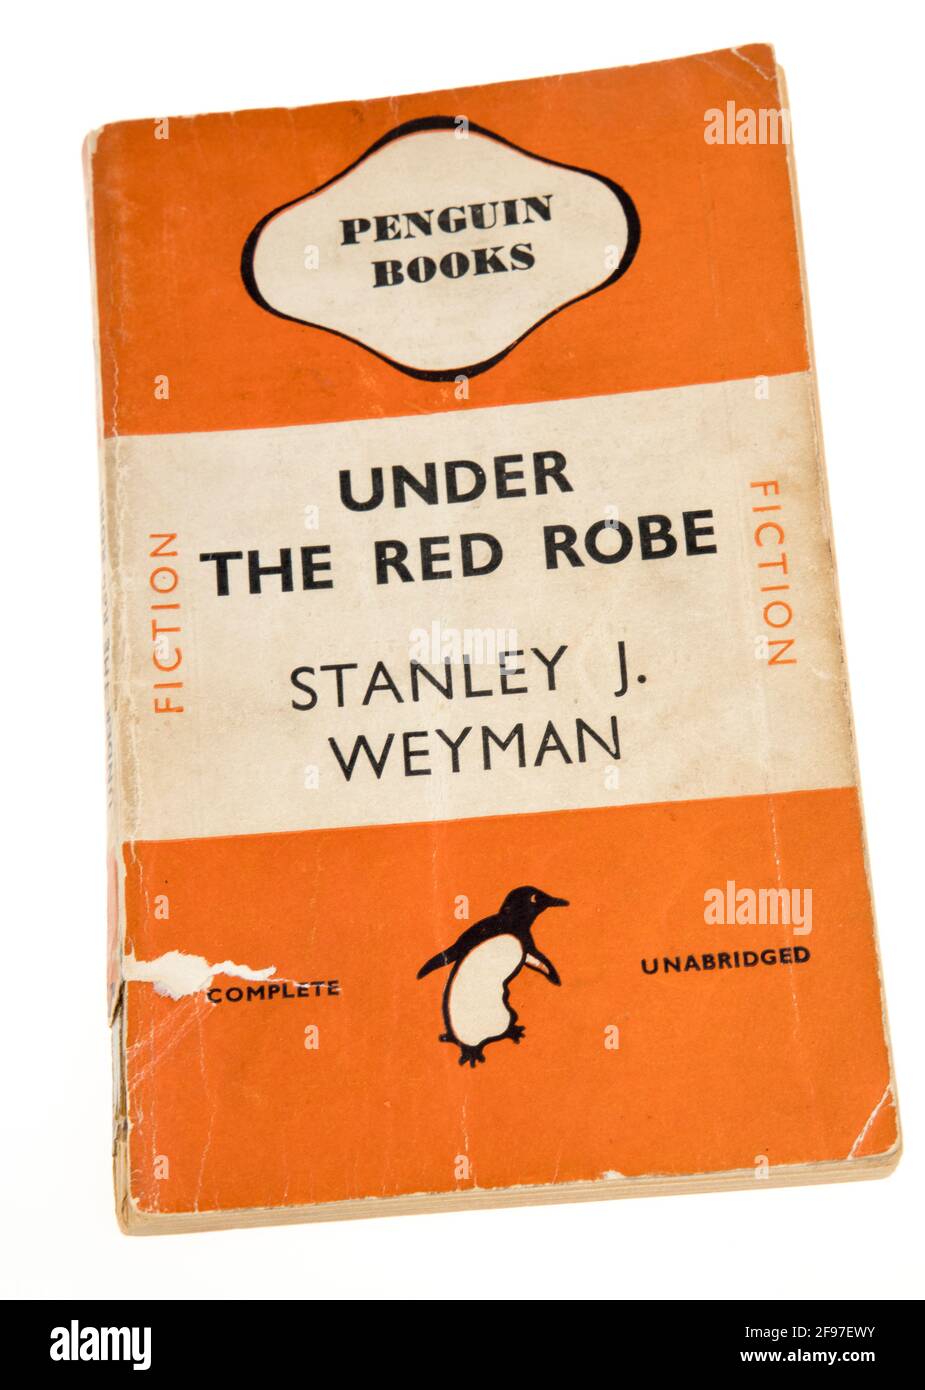 Under the Red Robe book by Stanley J. Weyman, published by Penguin books, first published 1911 reprinted 1945 Stock Photo